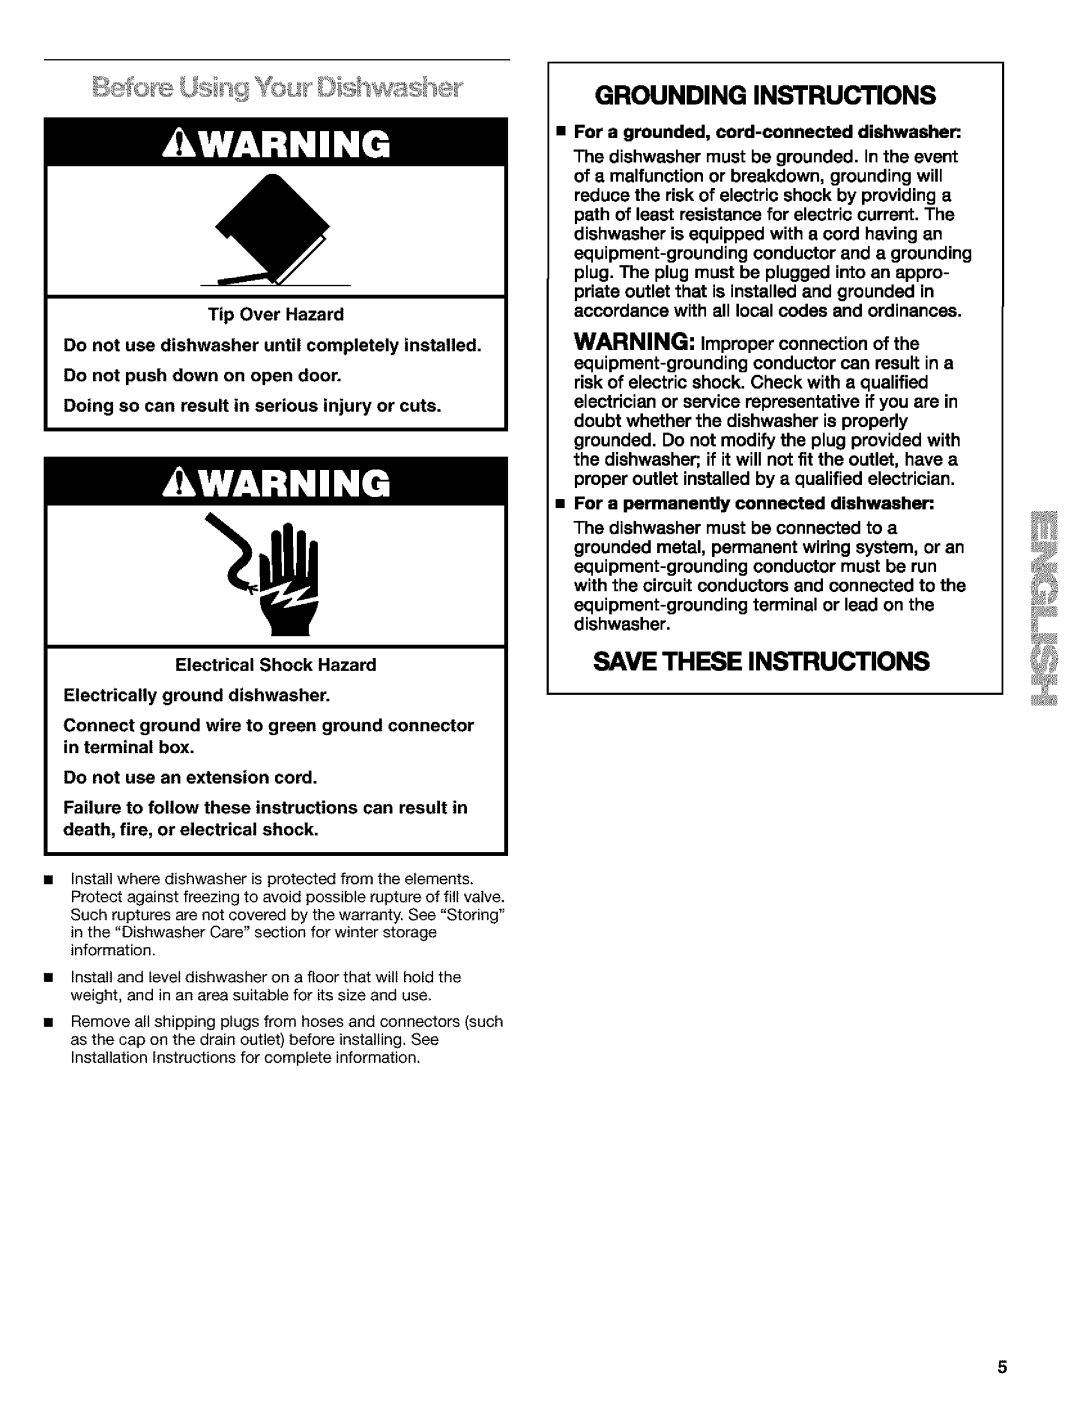 Kenmore 665.15522 Doingso canresultin seriousinjuryor cuts, ElectricalShockHazard, Save These Instructions, in terminalbox 